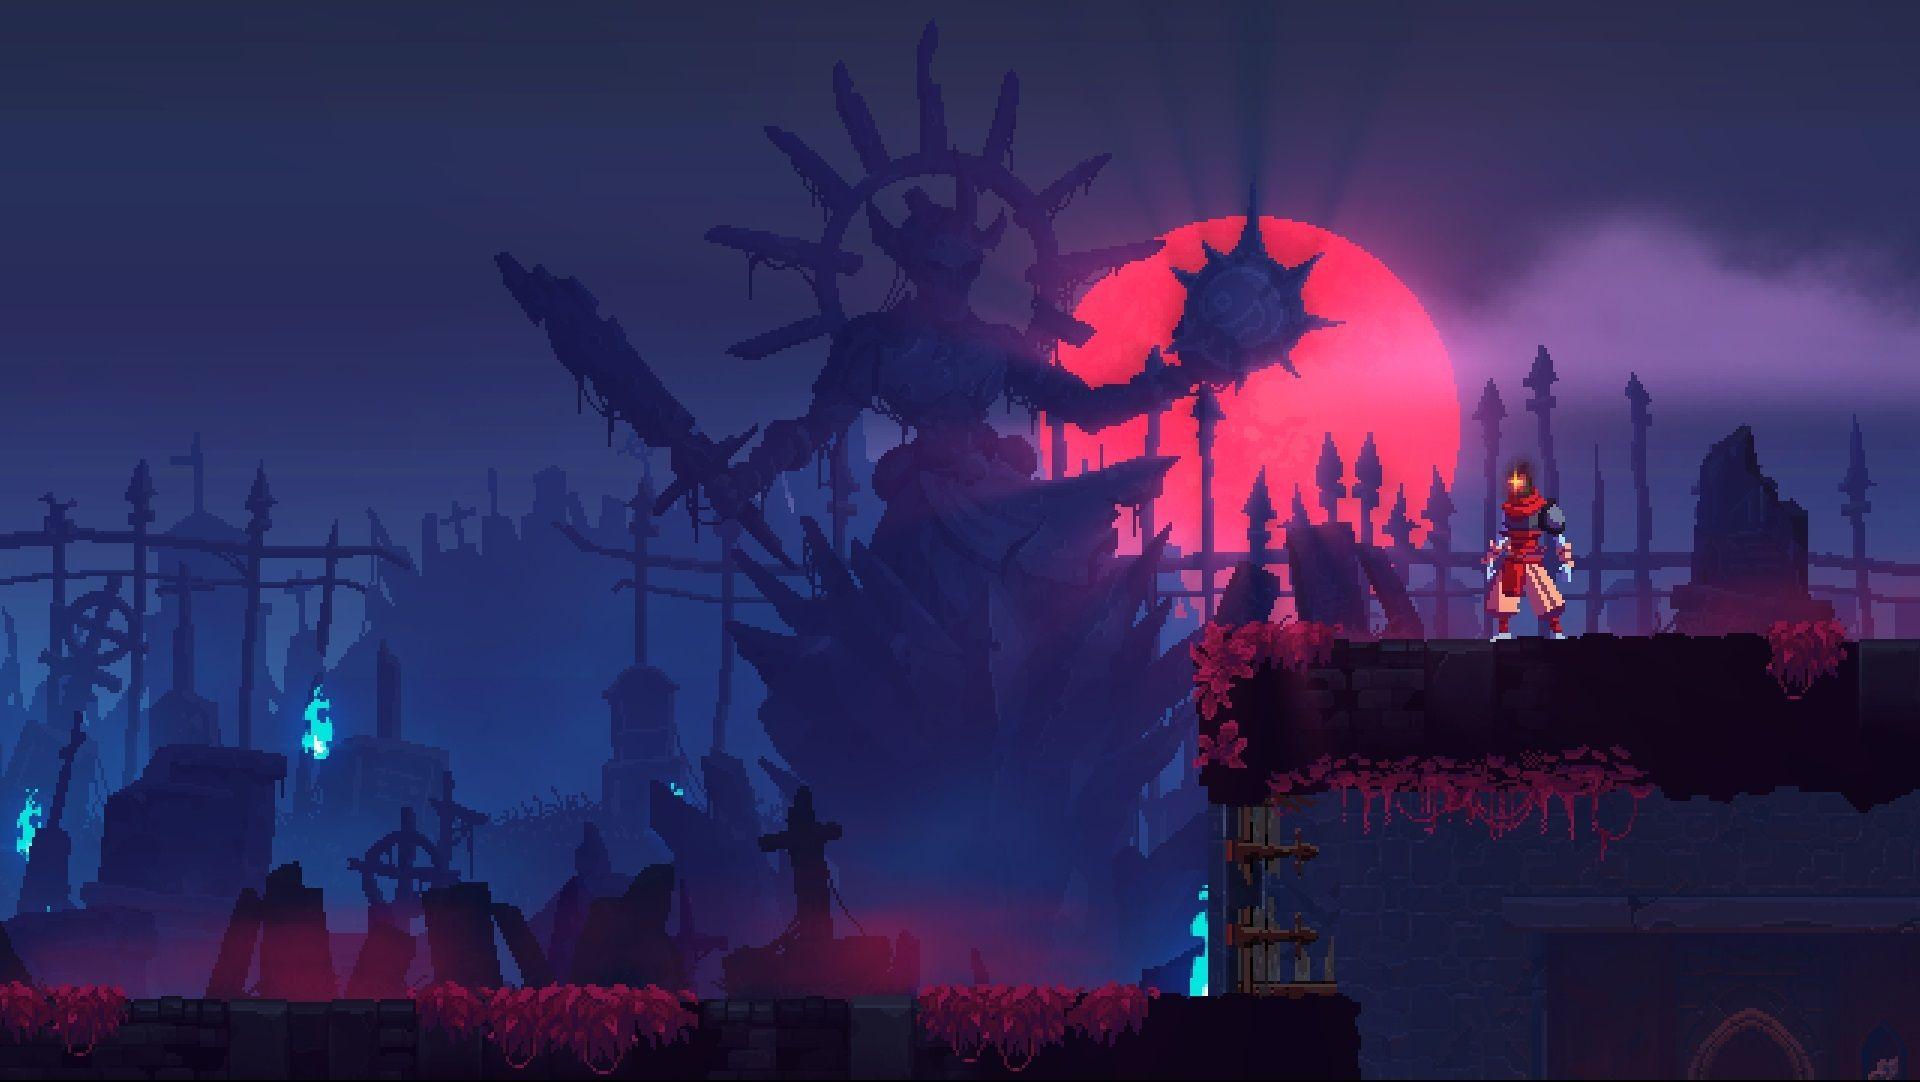 dead cells giant too hard